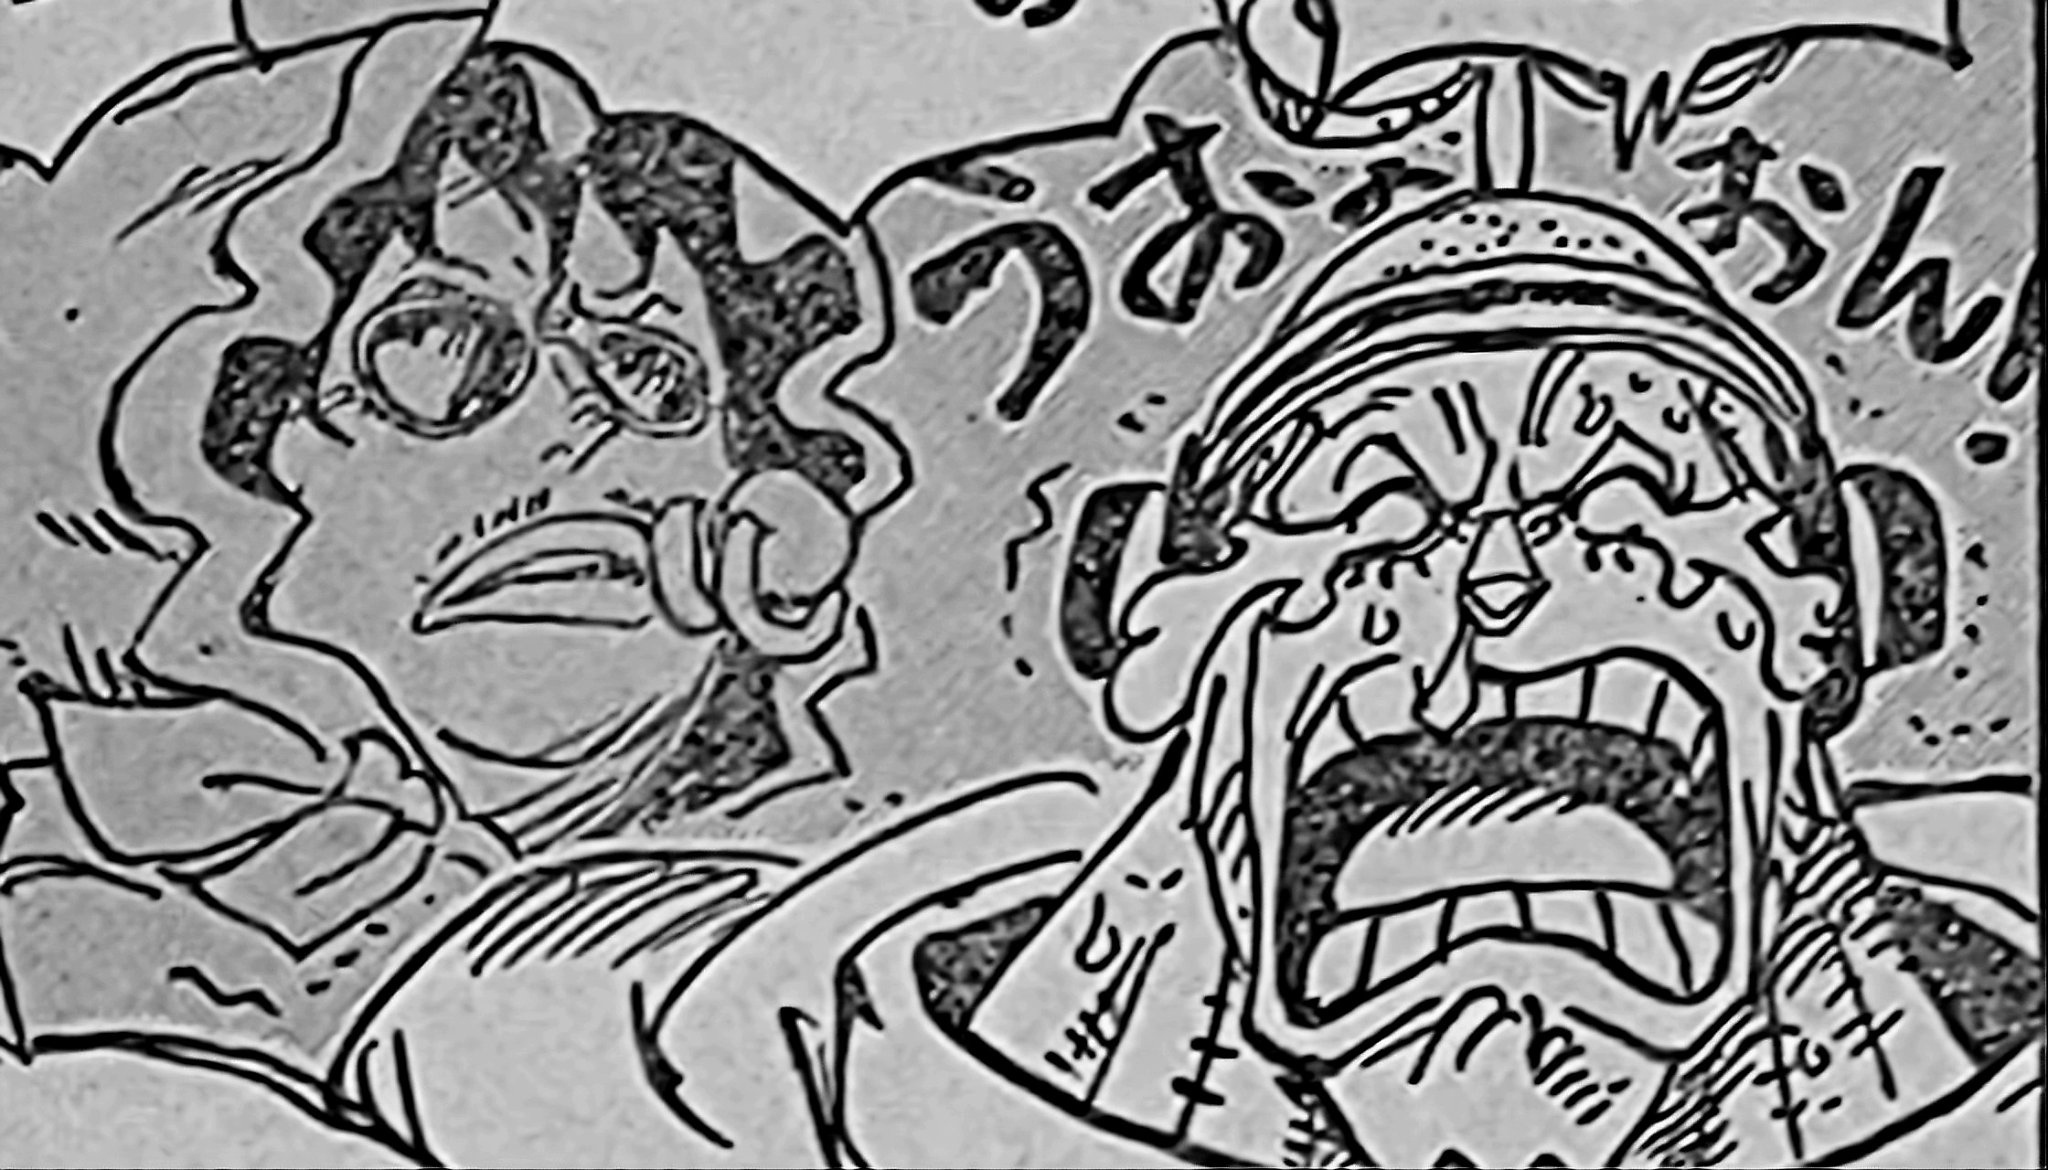 One Piece Chapter 1065 Spoilers - Six Vegapunk and Seraphim Jinbe